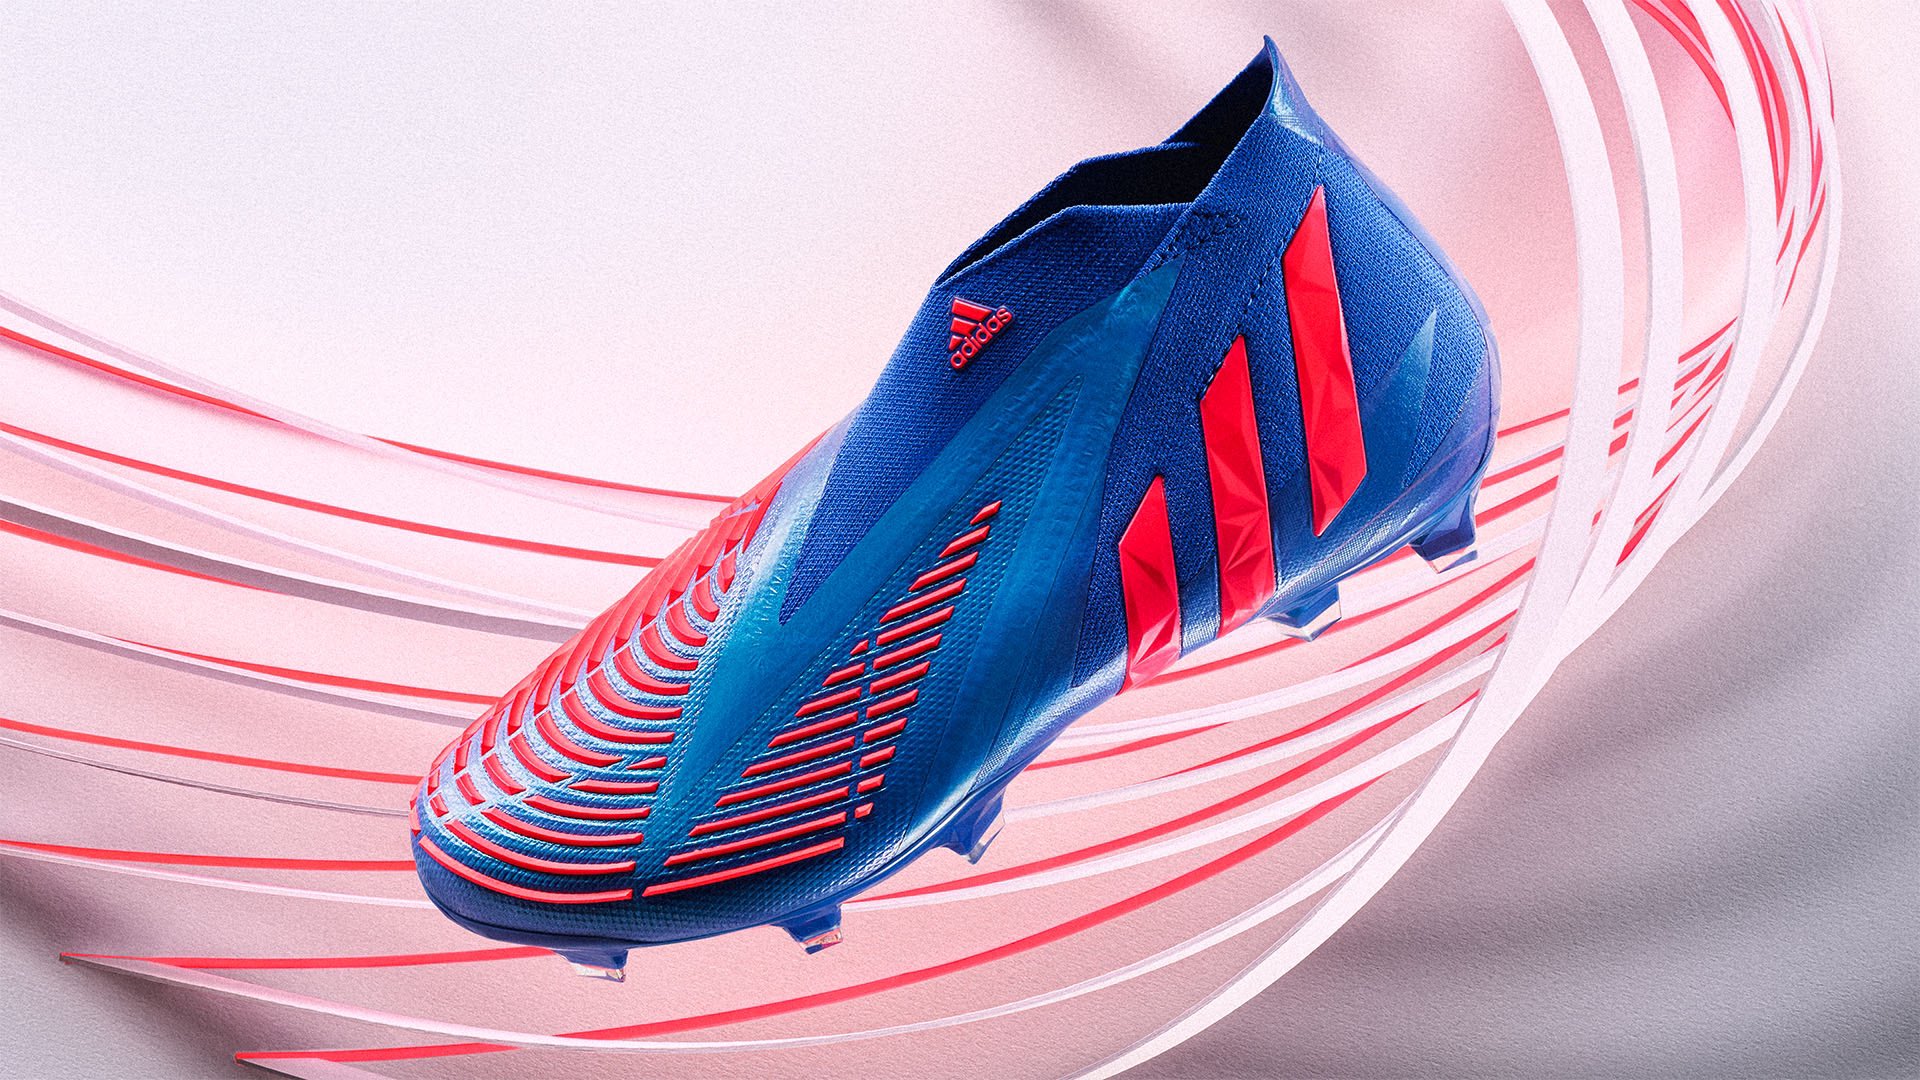 adidas Football on "Feel the Edge effect. ​ the Predator Edge, engineered to control your whole game.​ ​ Available now through https://t.co/41K9NbZCQw and select retail partners. https://t.co/IP07KRHqu2" / Twitter